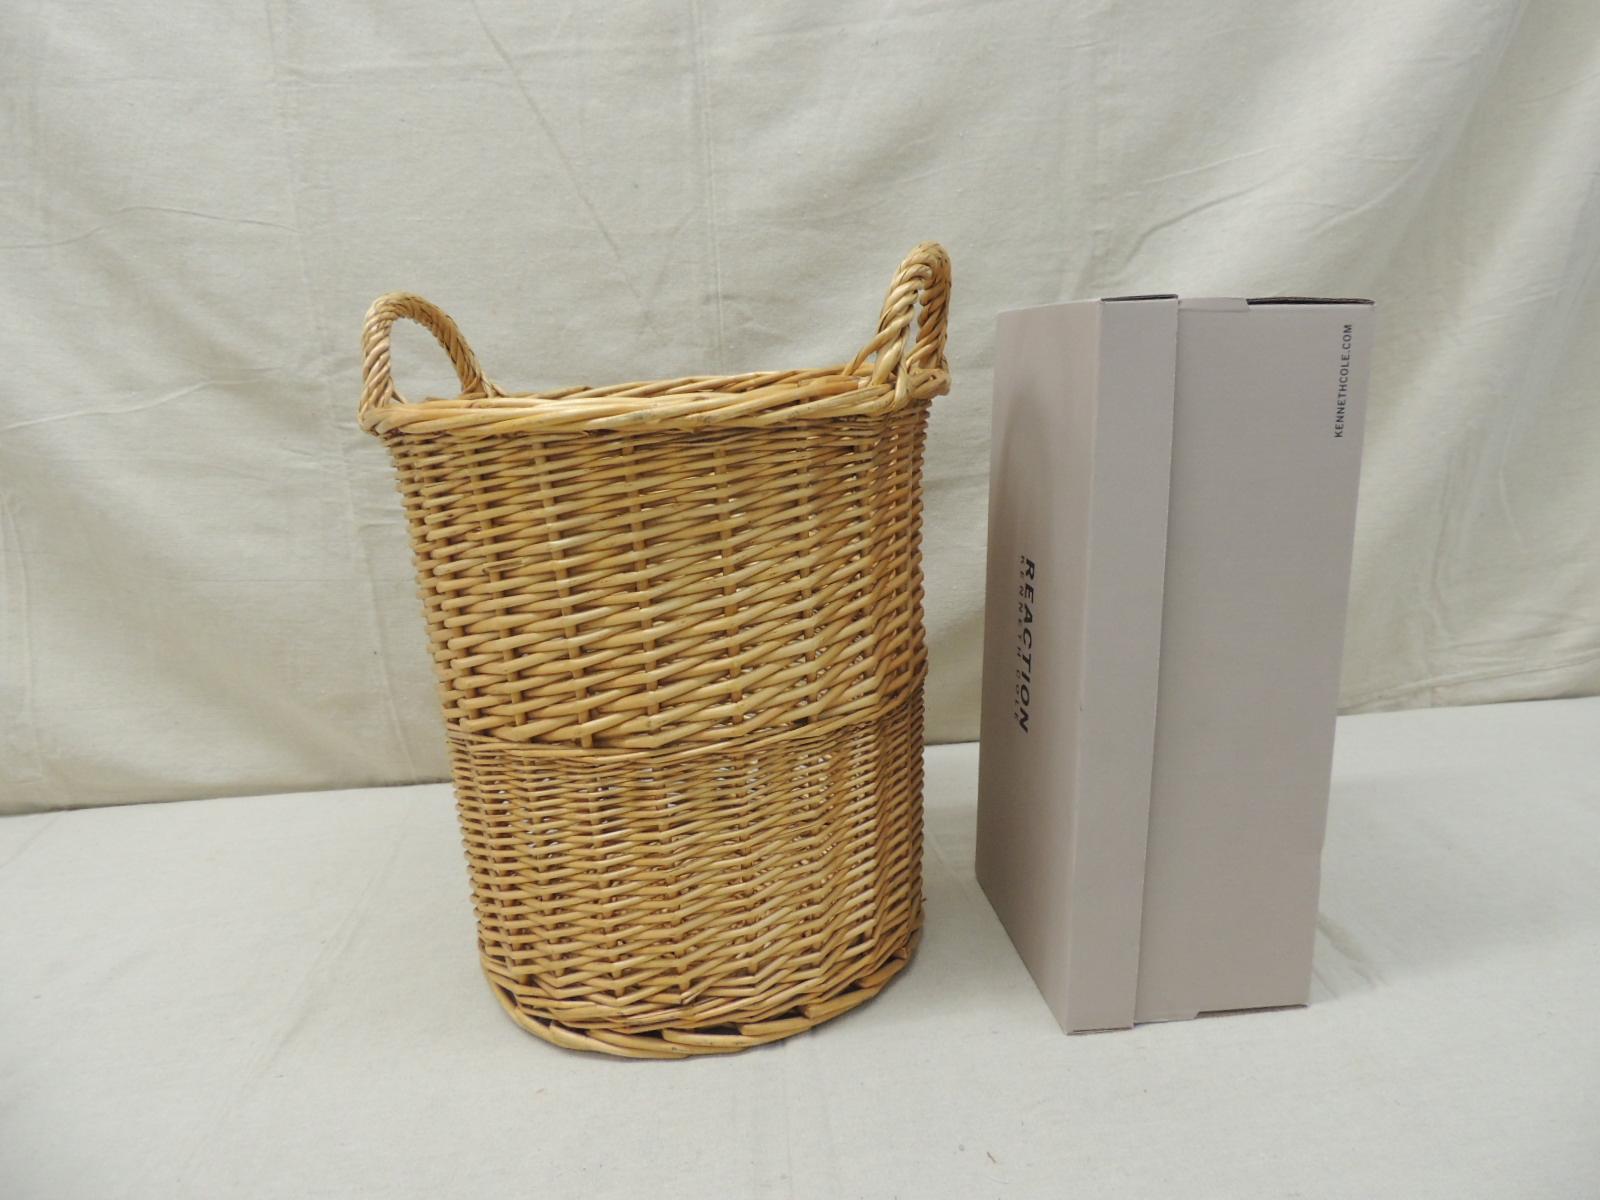 Hand-Crafted Round Woven Basket or Wastebasket with Handles